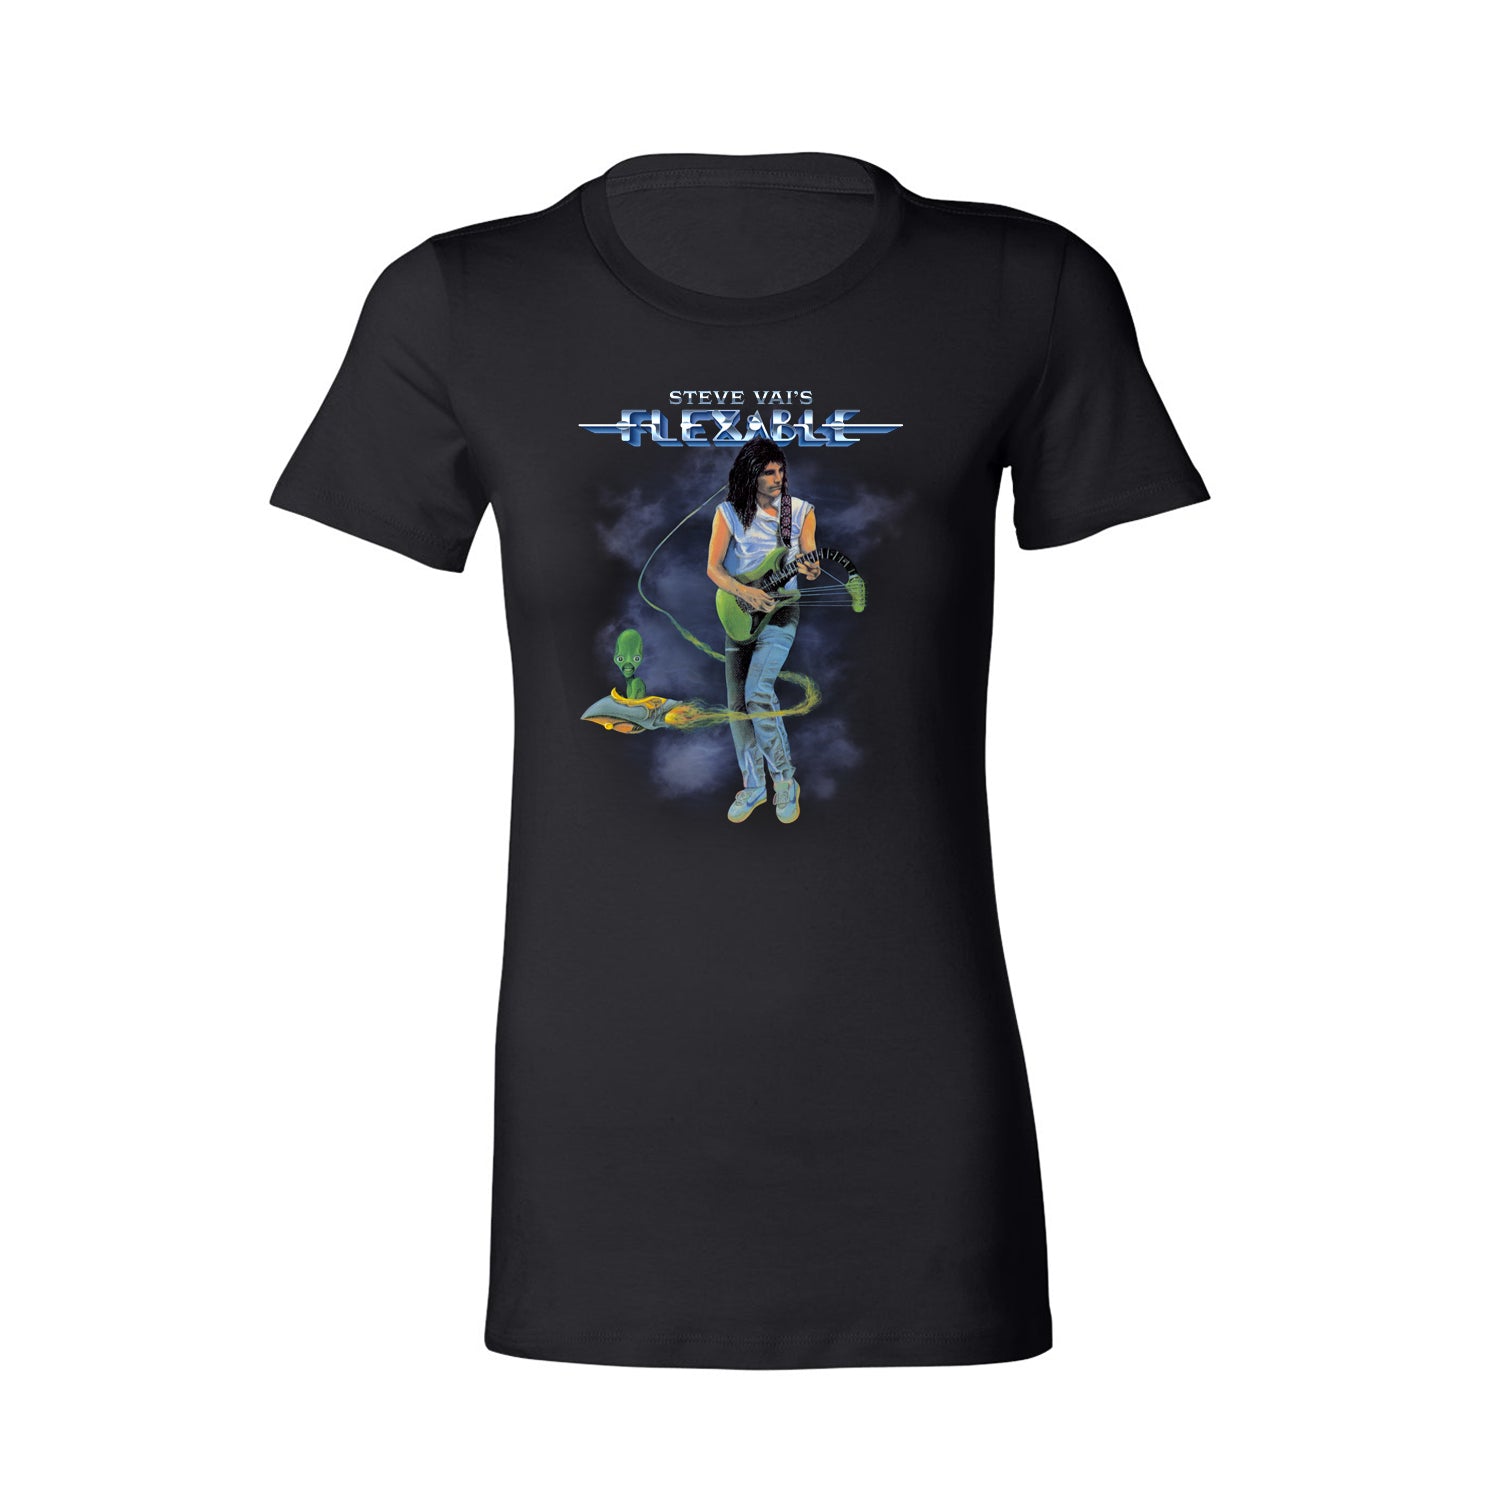 Image of a black women's tshirt against white background. there is a graphic of steve vai playing a green guitar. the neck of the guitar droops down. swirling around steve is an alien in a small ship. above this in blue and white text reads "steve vai's flexable".